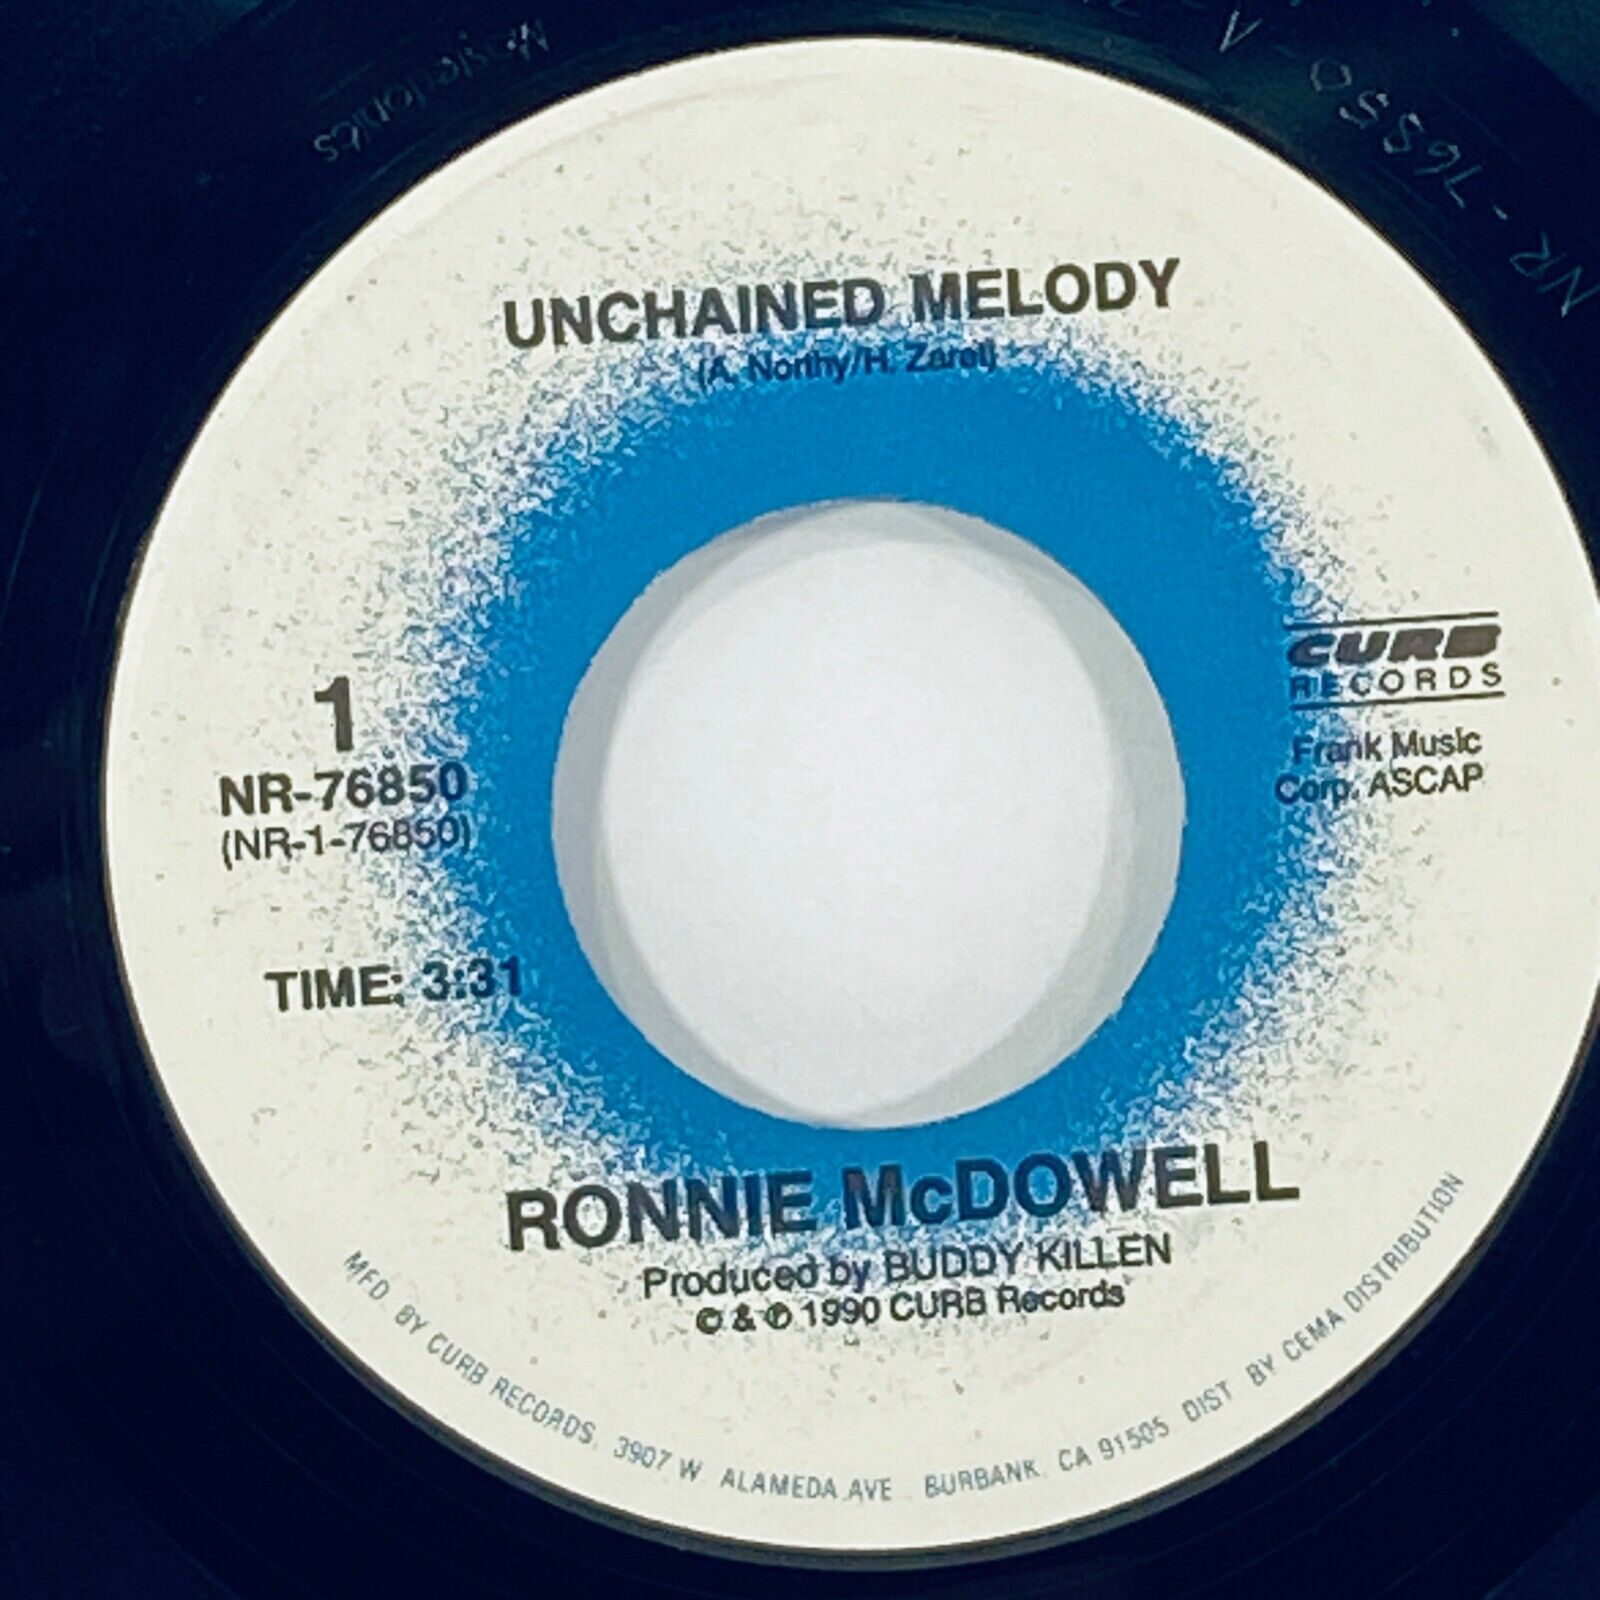 RONNIE MCDOWELL:  UNCHAINED MELODY / SHEET MUSIC,    CURB RECORDS   45 RPM